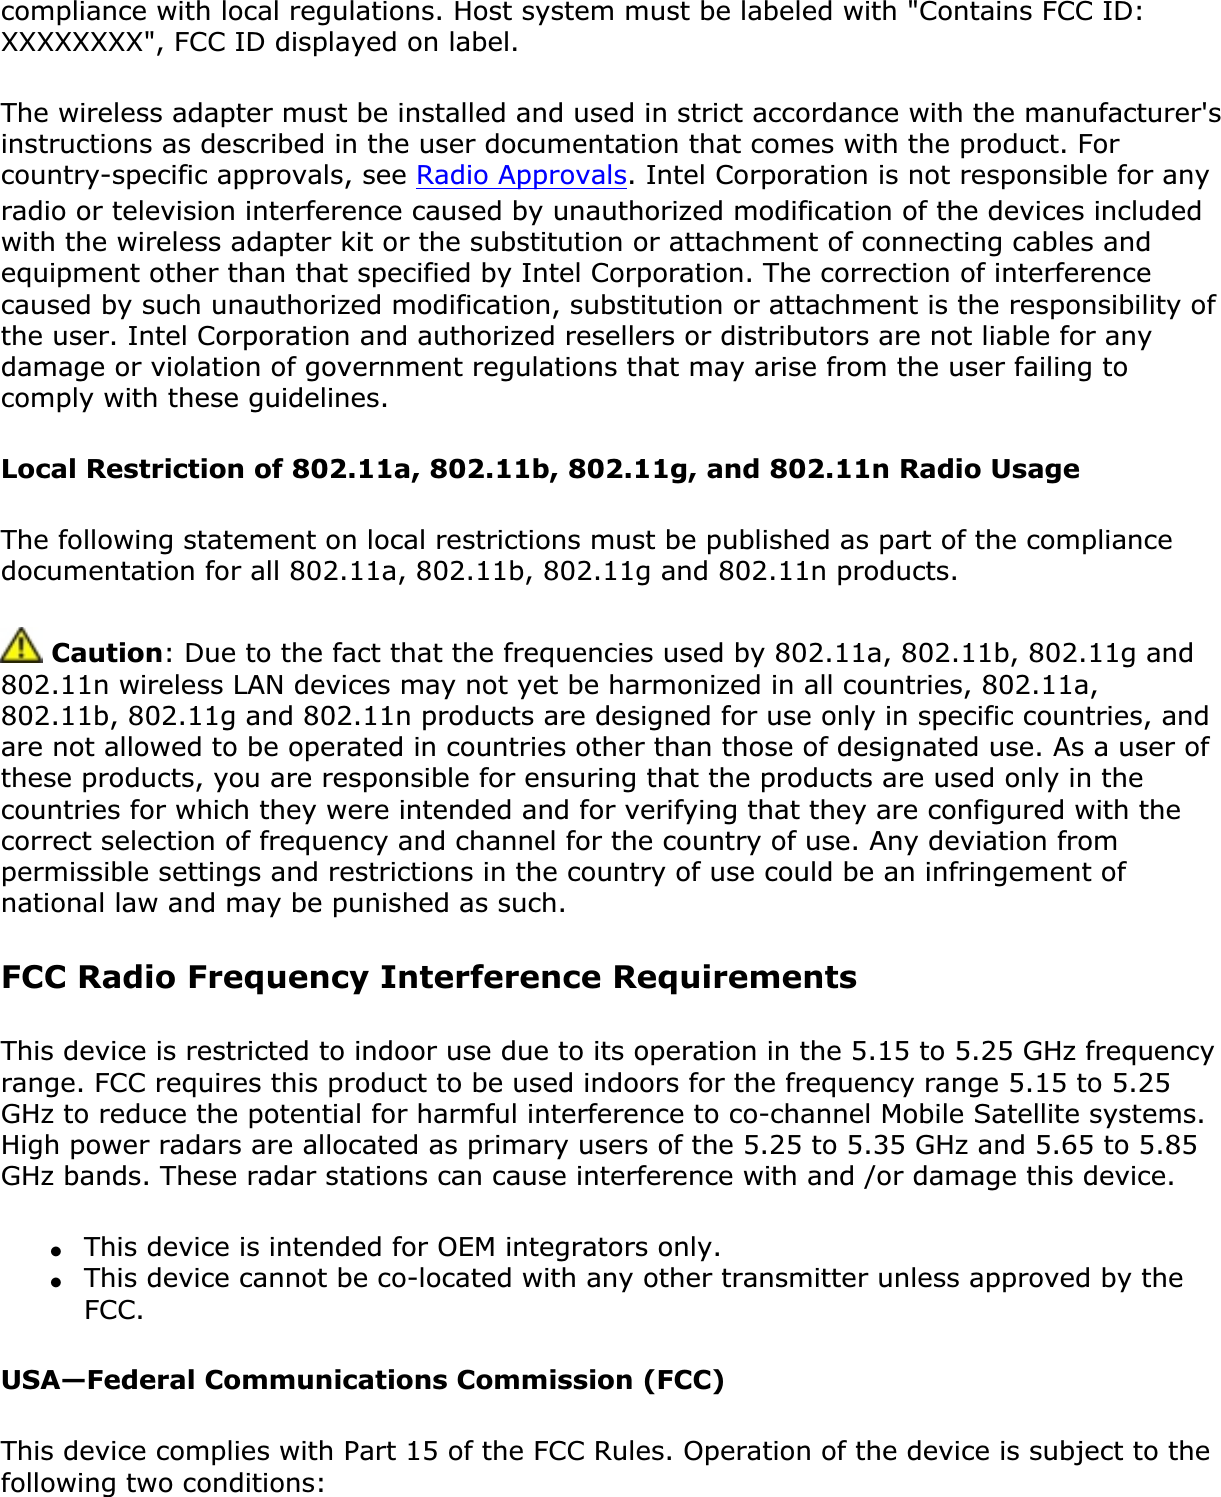 compliance with local regulations. Host system must be labeled with &quot;Contains FCC ID: XXXXXXXX&quot;, FCC ID displayed on label.The wireless adapter must be installed and used in strict accordance with the manufacturer&apos;s instructions as described in the user documentation that comes with the product. For country-specific approvals, see Radio Approvals. Intel Corporation is not responsible for any radio or television interference caused by unauthorized modification of the devices included with the wireless adapter kit or the substitution or attachment of connecting cables and equipment other than that specified by Intel Corporation. The correction of interference caused by such unauthorized modification, substitution or attachment is the responsibility of the user. Intel Corporation and authorized resellers or distributors are not liable for any damage or violation of government regulations that may arise from the user failing to comply with these guidelines.Local Restriction of 802.11a, 802.11b, 802.11g, and 802.11n Radio UsageThe following statement on local restrictions must be published as part of the compliance documentation for all 802.11a, 802.11b, 802.11g and 802.11n products.  Caution: Due to the fact that the frequencies used by 802.11a, 802.11b, 802.11g and 802.11n wireless LAN devices may not yet be harmonized in all countries, 802.11a, 802.11b, 802.11g and 802.11n products are designed for use only in specific countries, and are not allowed to be operated in countries other than those of designated use. As a user of these products, you are responsible for ensuring that the products are used only in the countries for which they were intended and for verifying that they are configured with the correct selection of frequency and channel for the country of use. Any deviation from permissible settings and restrictions in the country of use could be an infringement of national law and may be punished as such. FCC Radio Frequency Interference Requirements This device is restricted to indoor use due to its operation in the 5.15 to 5.25 GHz frequency range. FCC requires this product to be used indoors for the frequency range 5.15 to 5.25 GHz to reduce the potential for harmful interference to co-channel Mobile Satellite systems. High power radars are allocated as primary users of the 5.25 to 5.35 GHz and 5.65 to 5.85 GHz bands. These radar stations can cause interference with and /or damage this device. ●This device is intended for OEM integrators only.●This device cannot be co-located with any other transmitter unless approved by the FCC.USA—Federal Communications Commission (FCC)This device complies with Part 15 of the FCC Rules. Operation of the device is subject to the following two conditions: